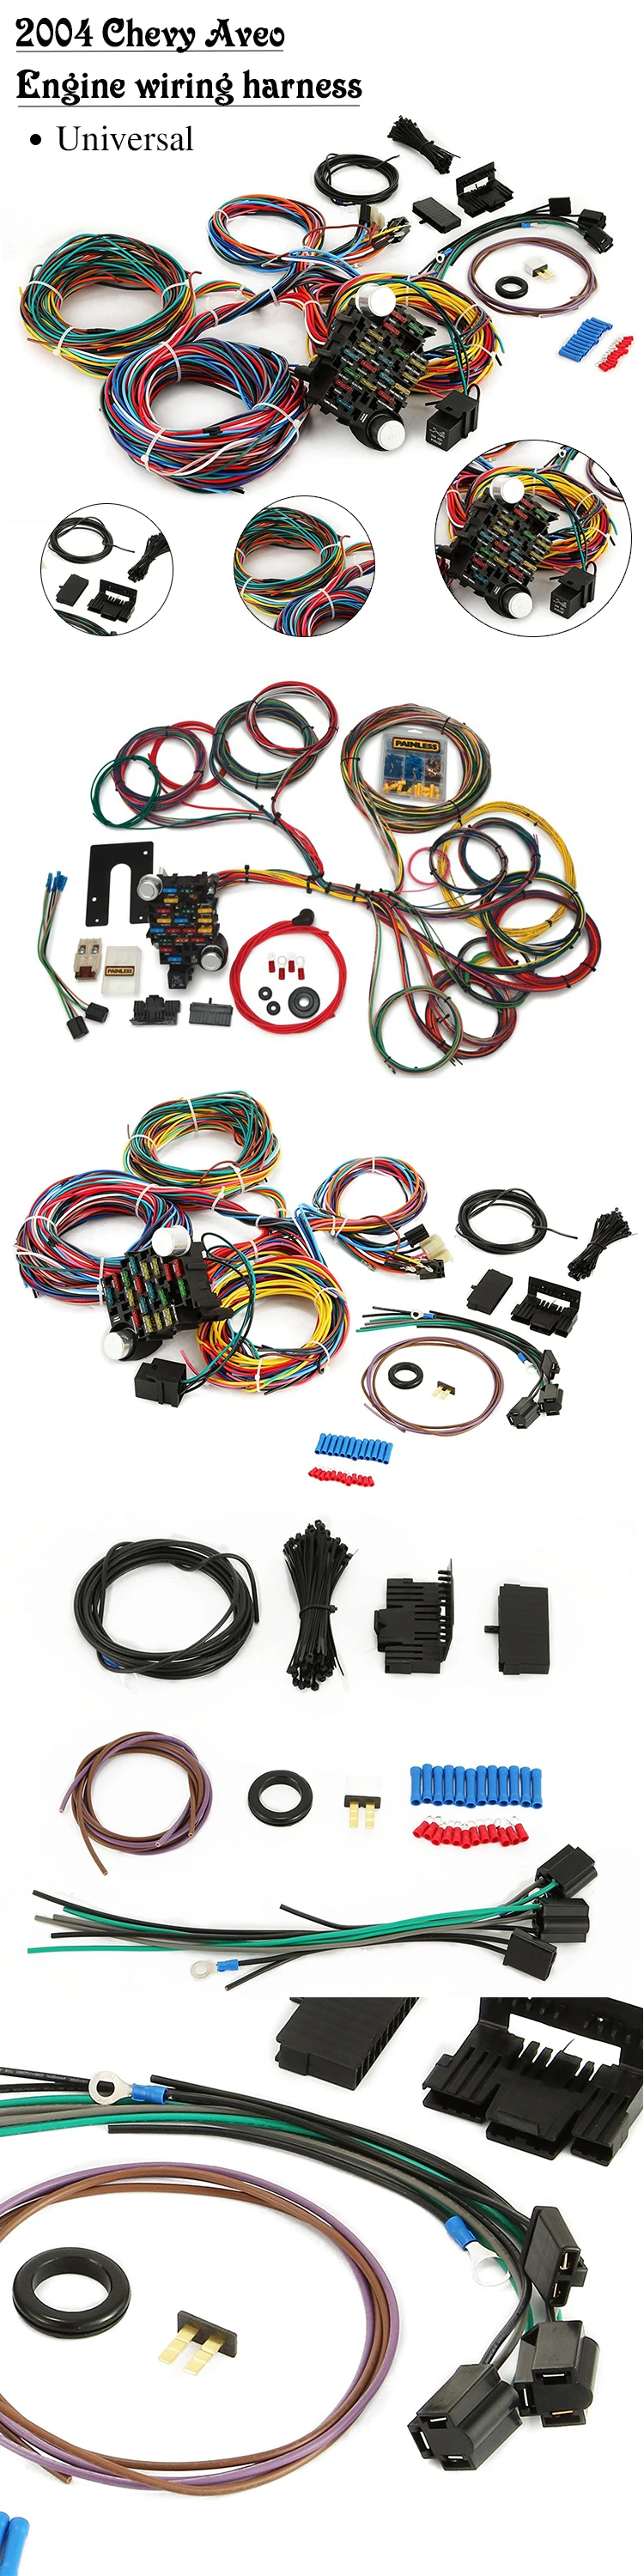 21 Circuit Engine Wiring Harness For 2004 0hevy Ave0 Engine Wiring